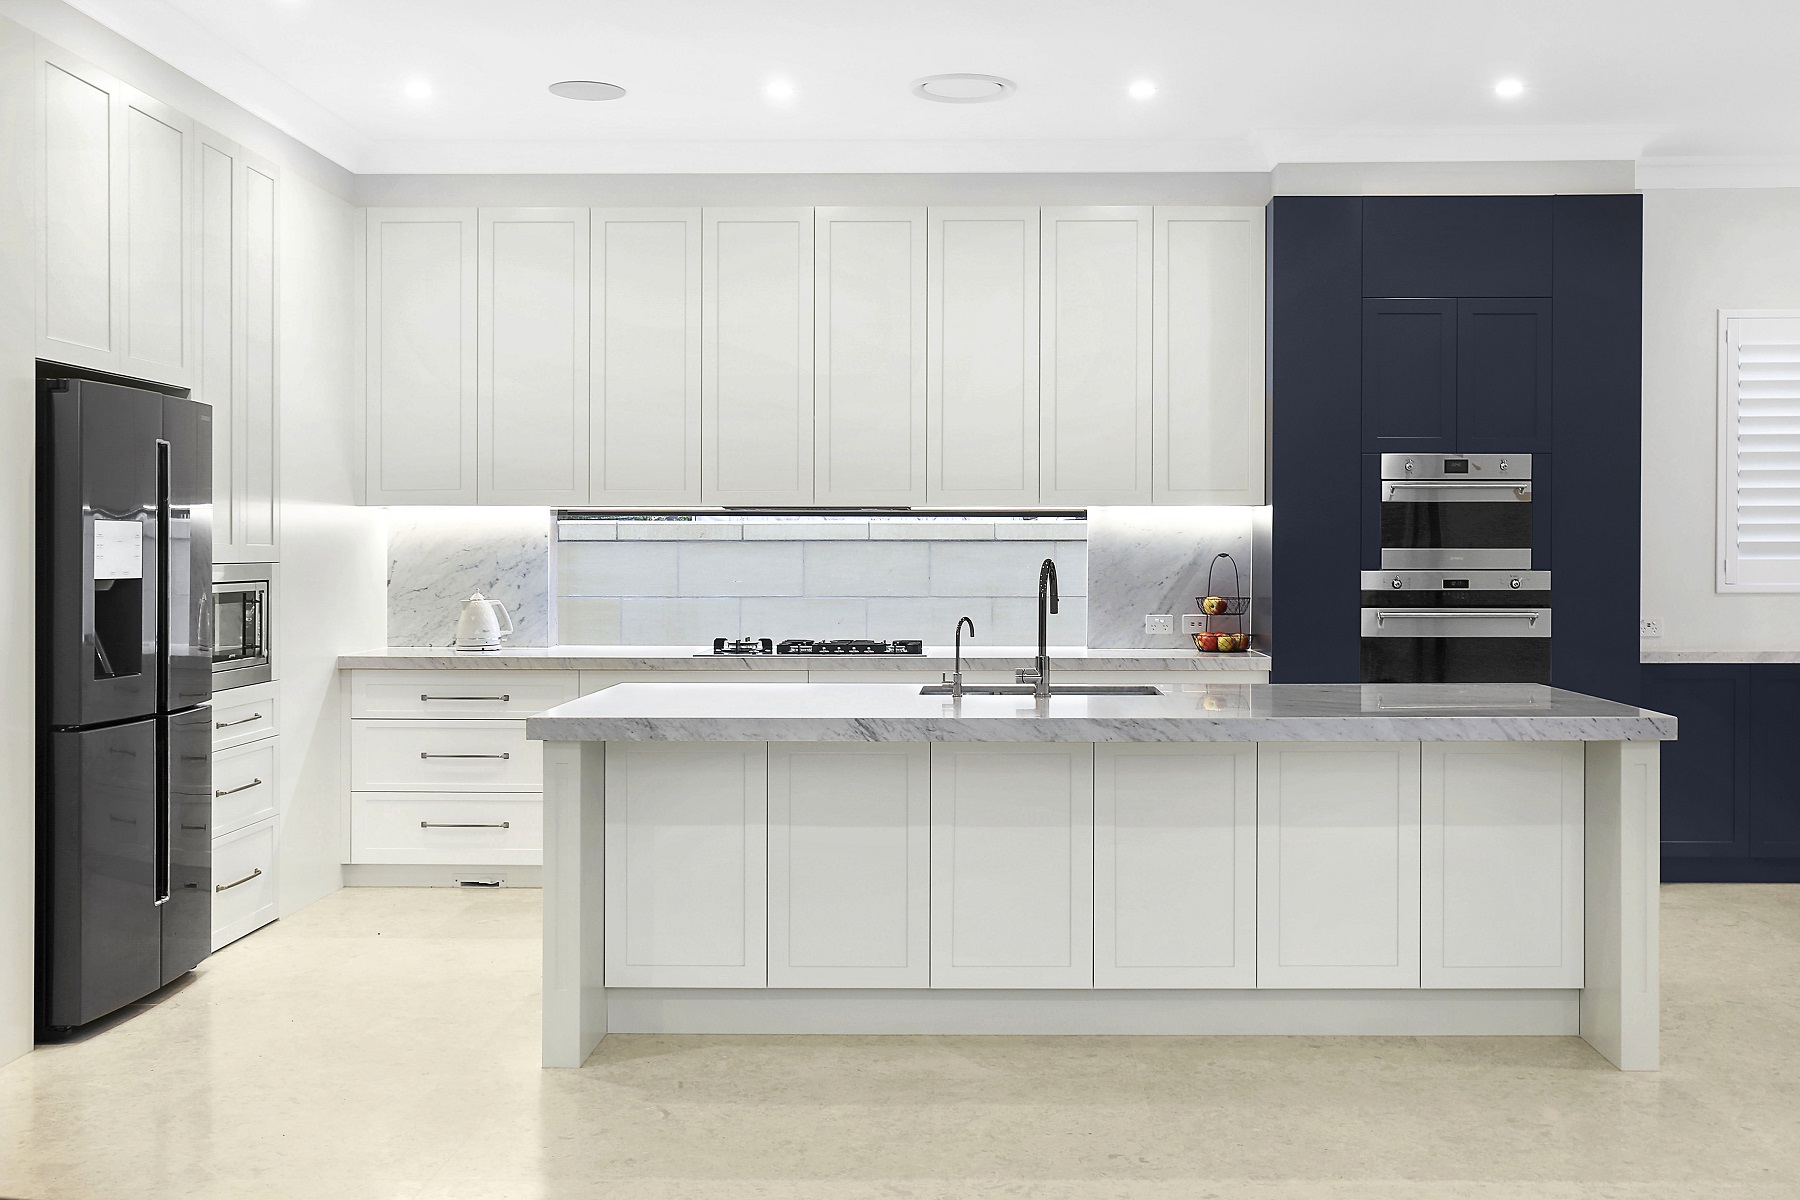 Shaker style two-tone Polyurethane kitchen with a Carrara marble benchtop - Earlwood, Sydney